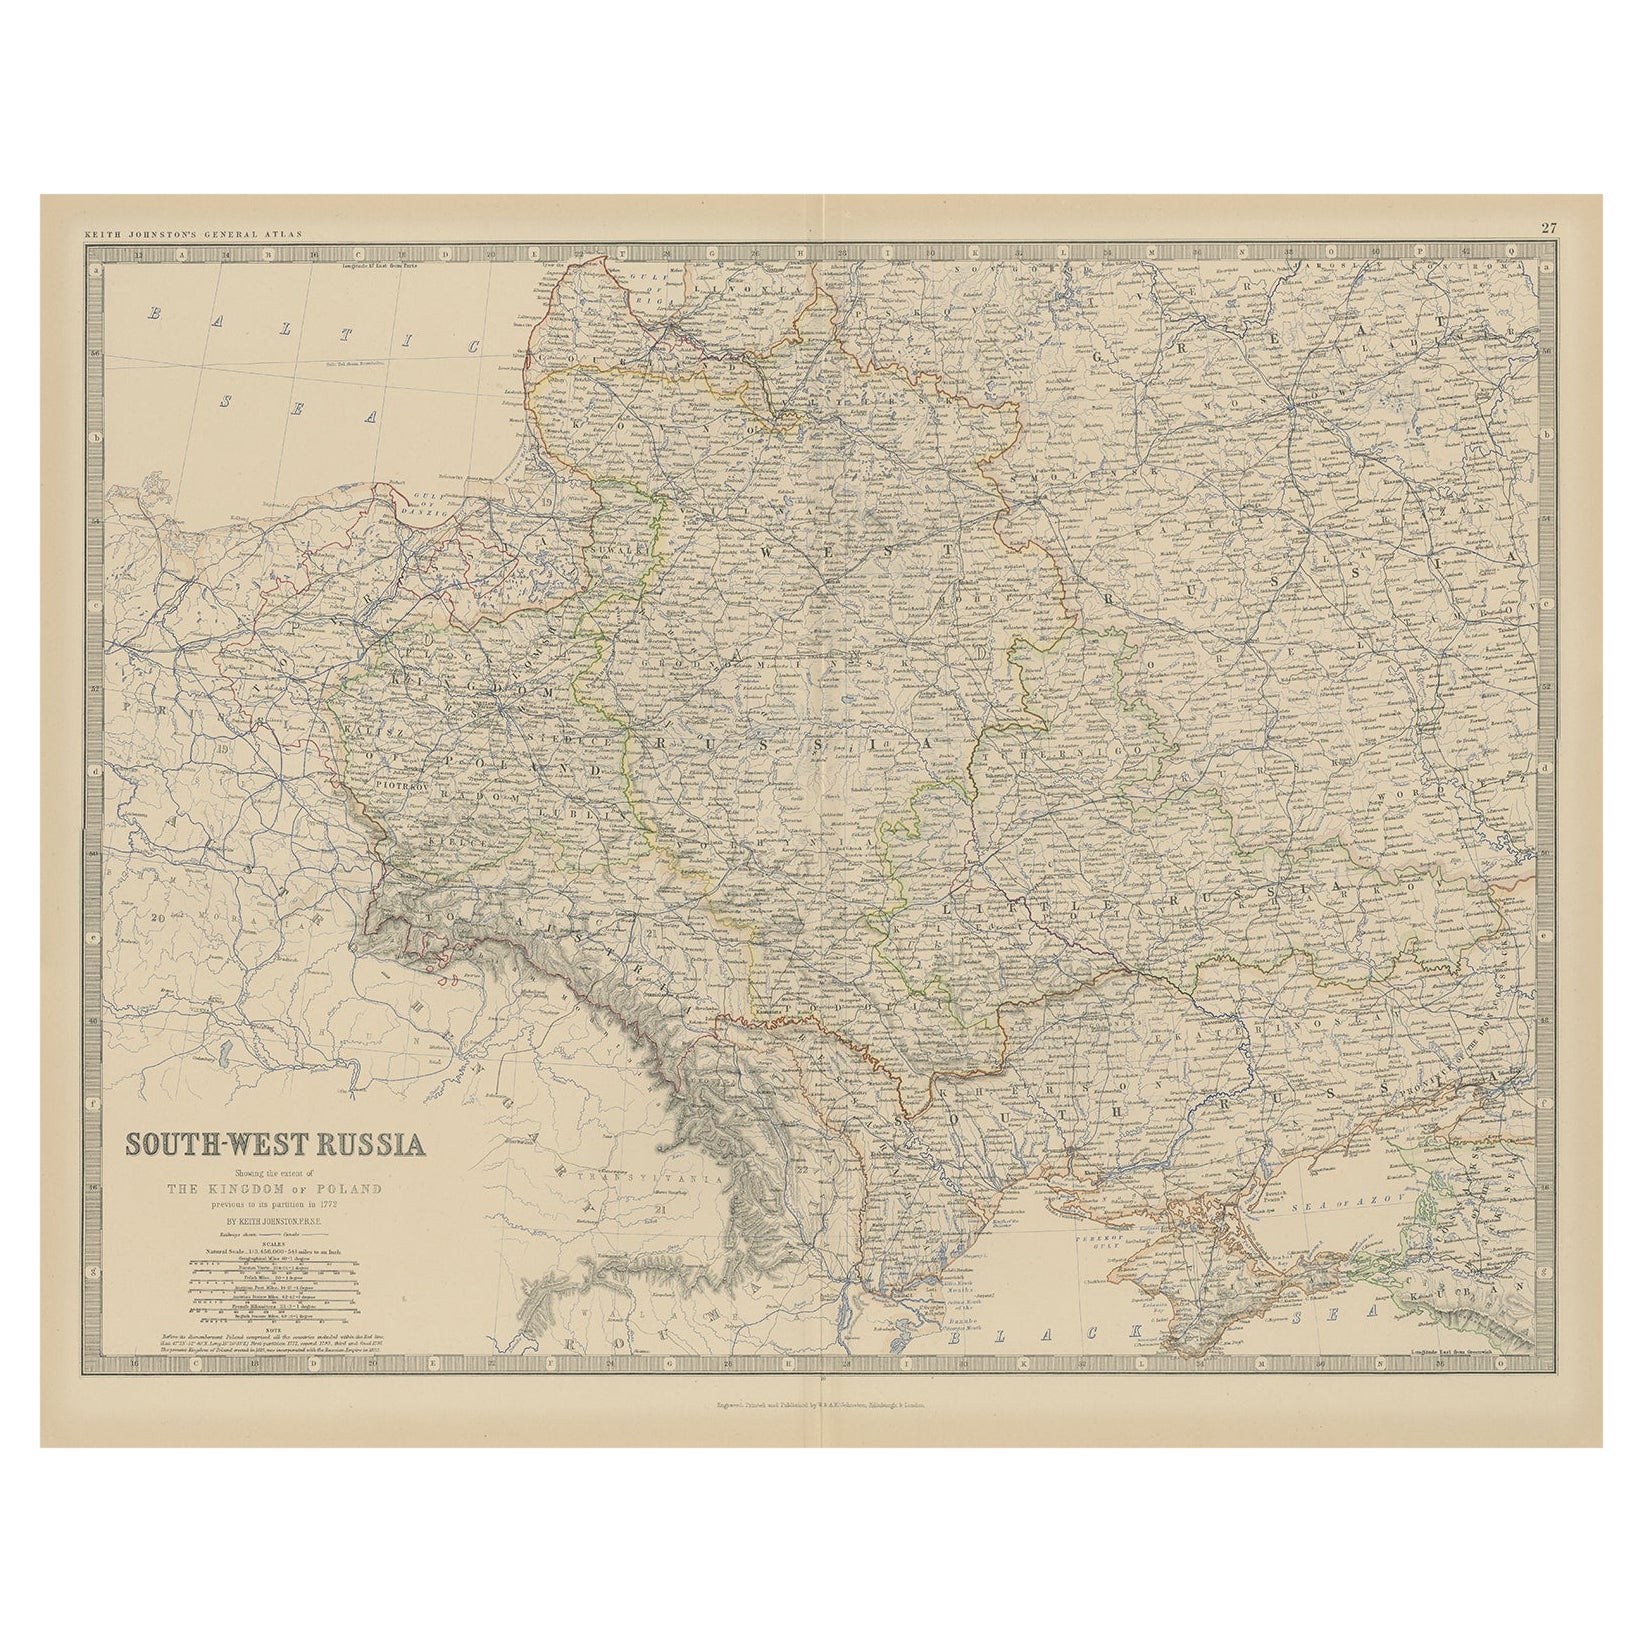 Old Map of Southern Russia, Incl the Extent of the Kingdom of Poland, 1882 For Sale